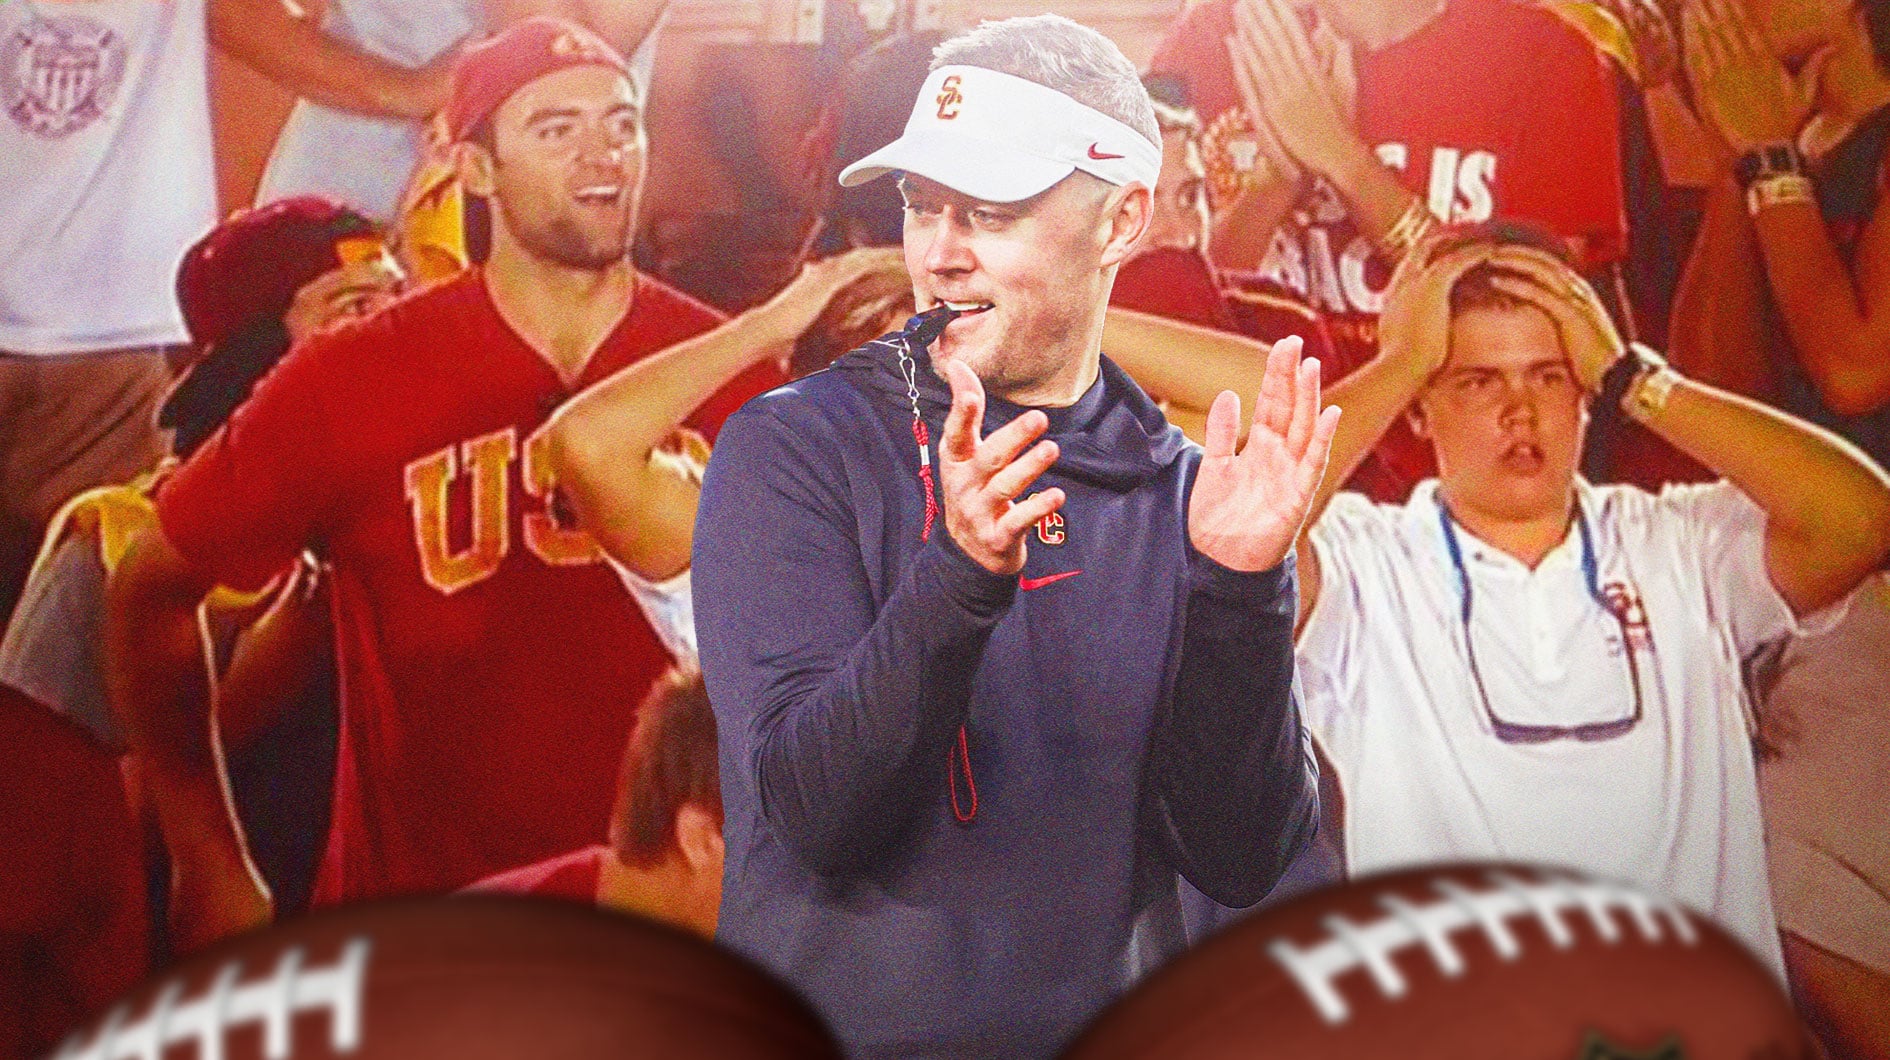 USC football coach Lincoln Riley in foreground, clapping hands. In the background, USC fans look stunned.